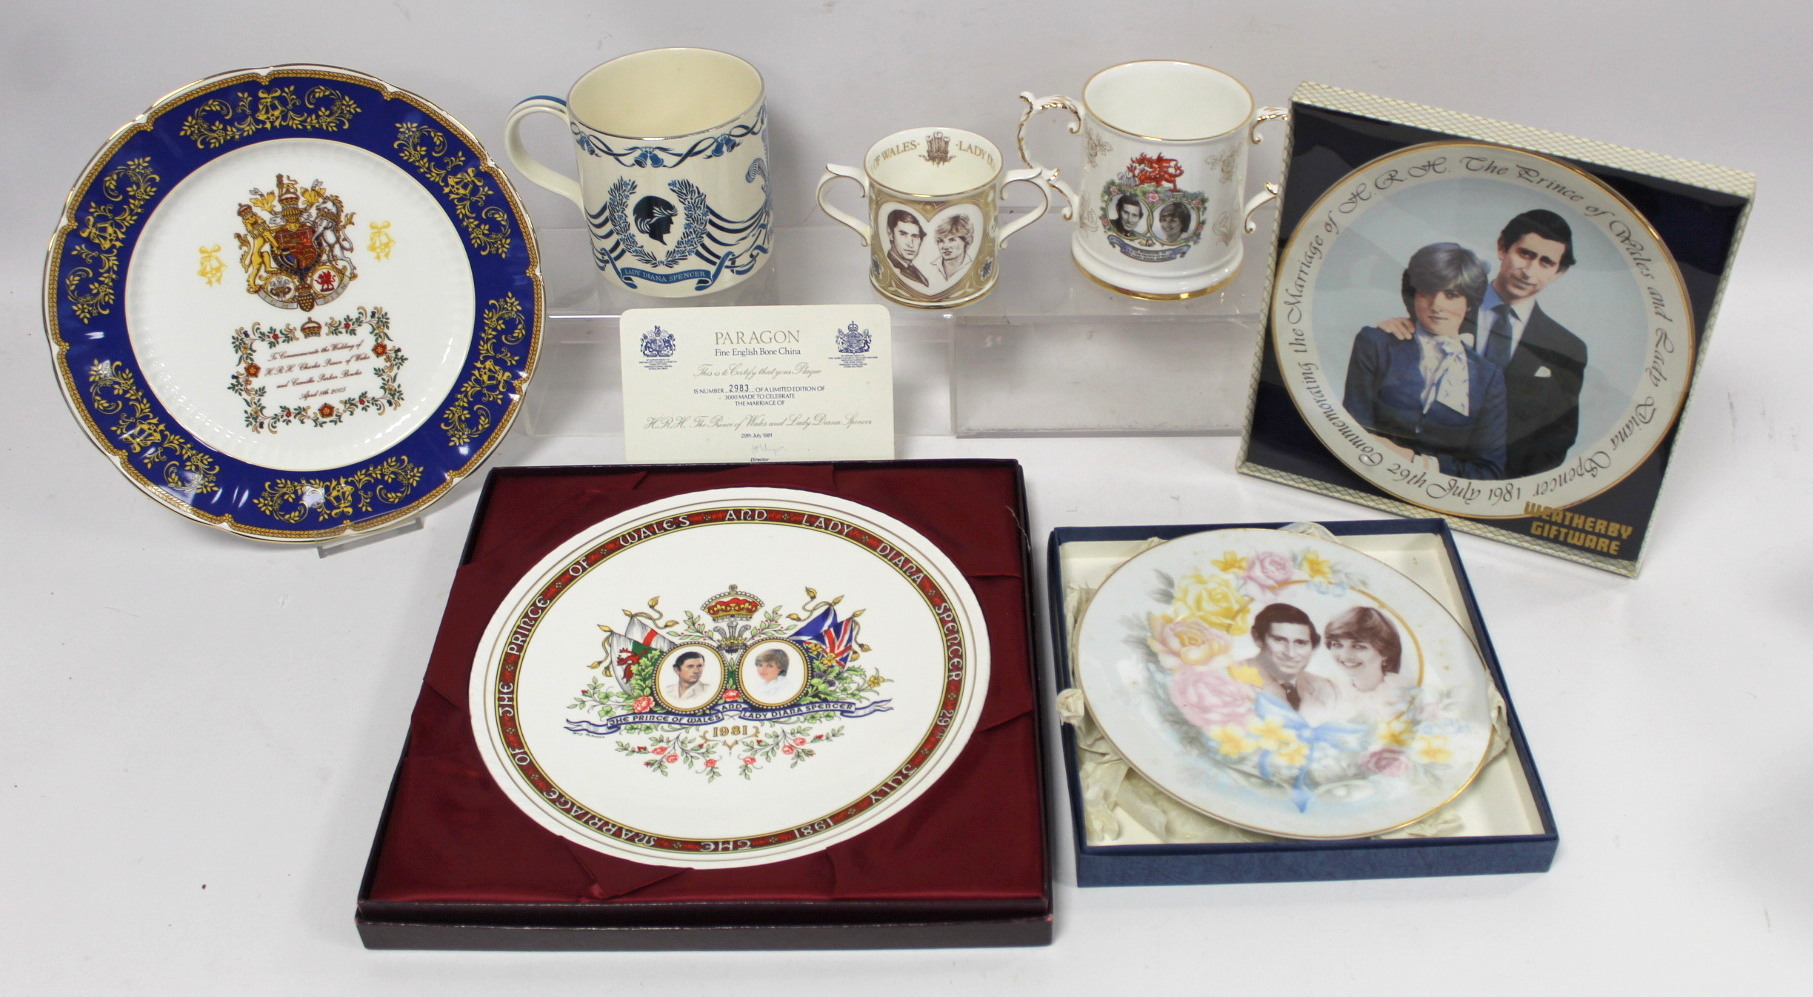 Six items of commemorative ware for the Royal Wedding of Charles Prince of Wales and Lady Diana